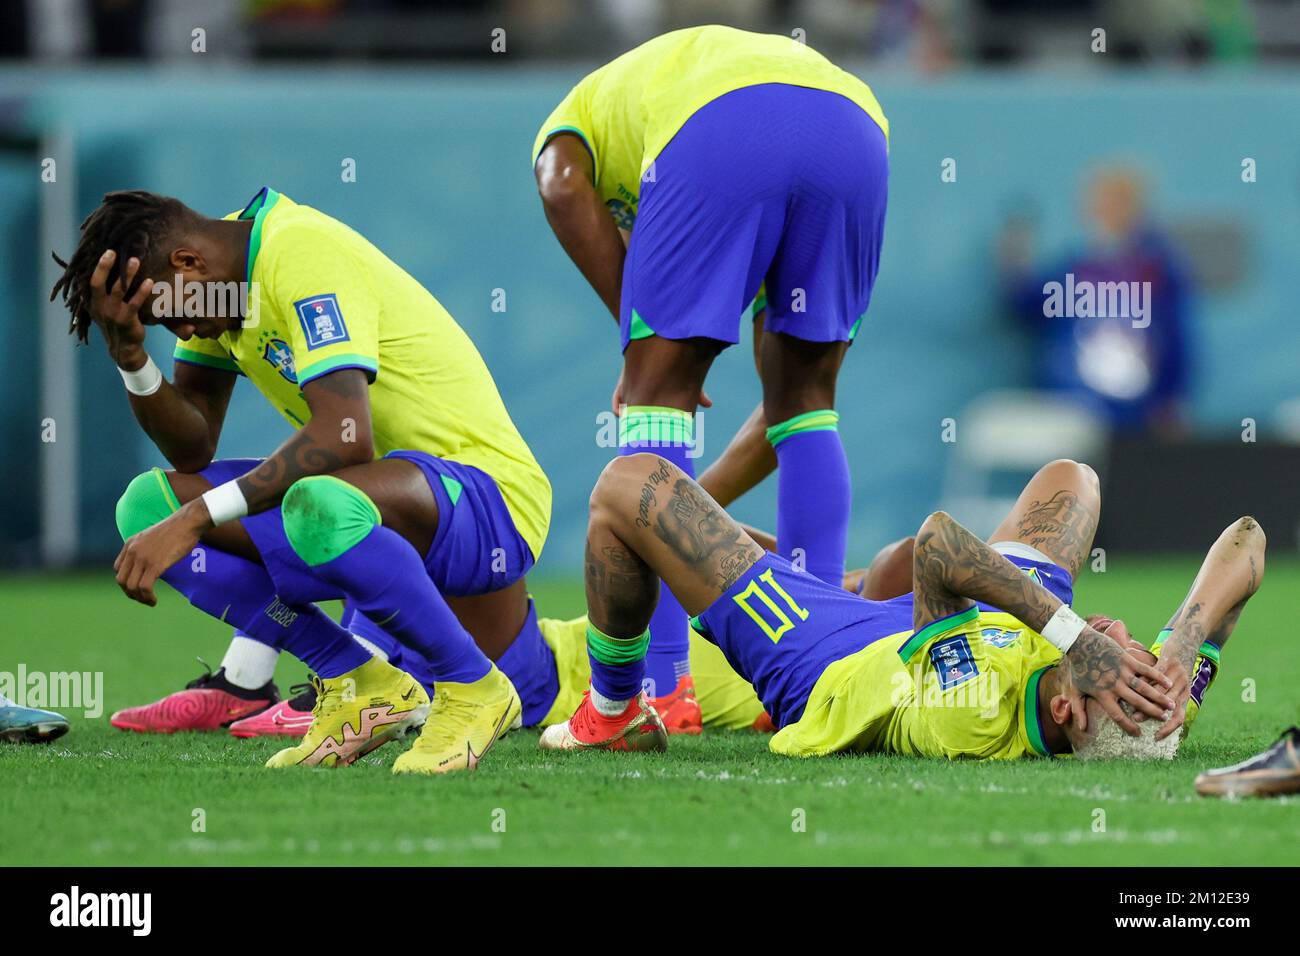 Doha, Qatar. 09th Dec, 2022. Fred e Neymar Brazil player during a match against Croatia valid for the quarterfinals of the FIFA World Cup in Qatar at Education City Stadium in Doha, Qatar. December 9, 2022 Photo:William Volcov Credit: Brazil Photo Press/Alamy Live News Stock Photo